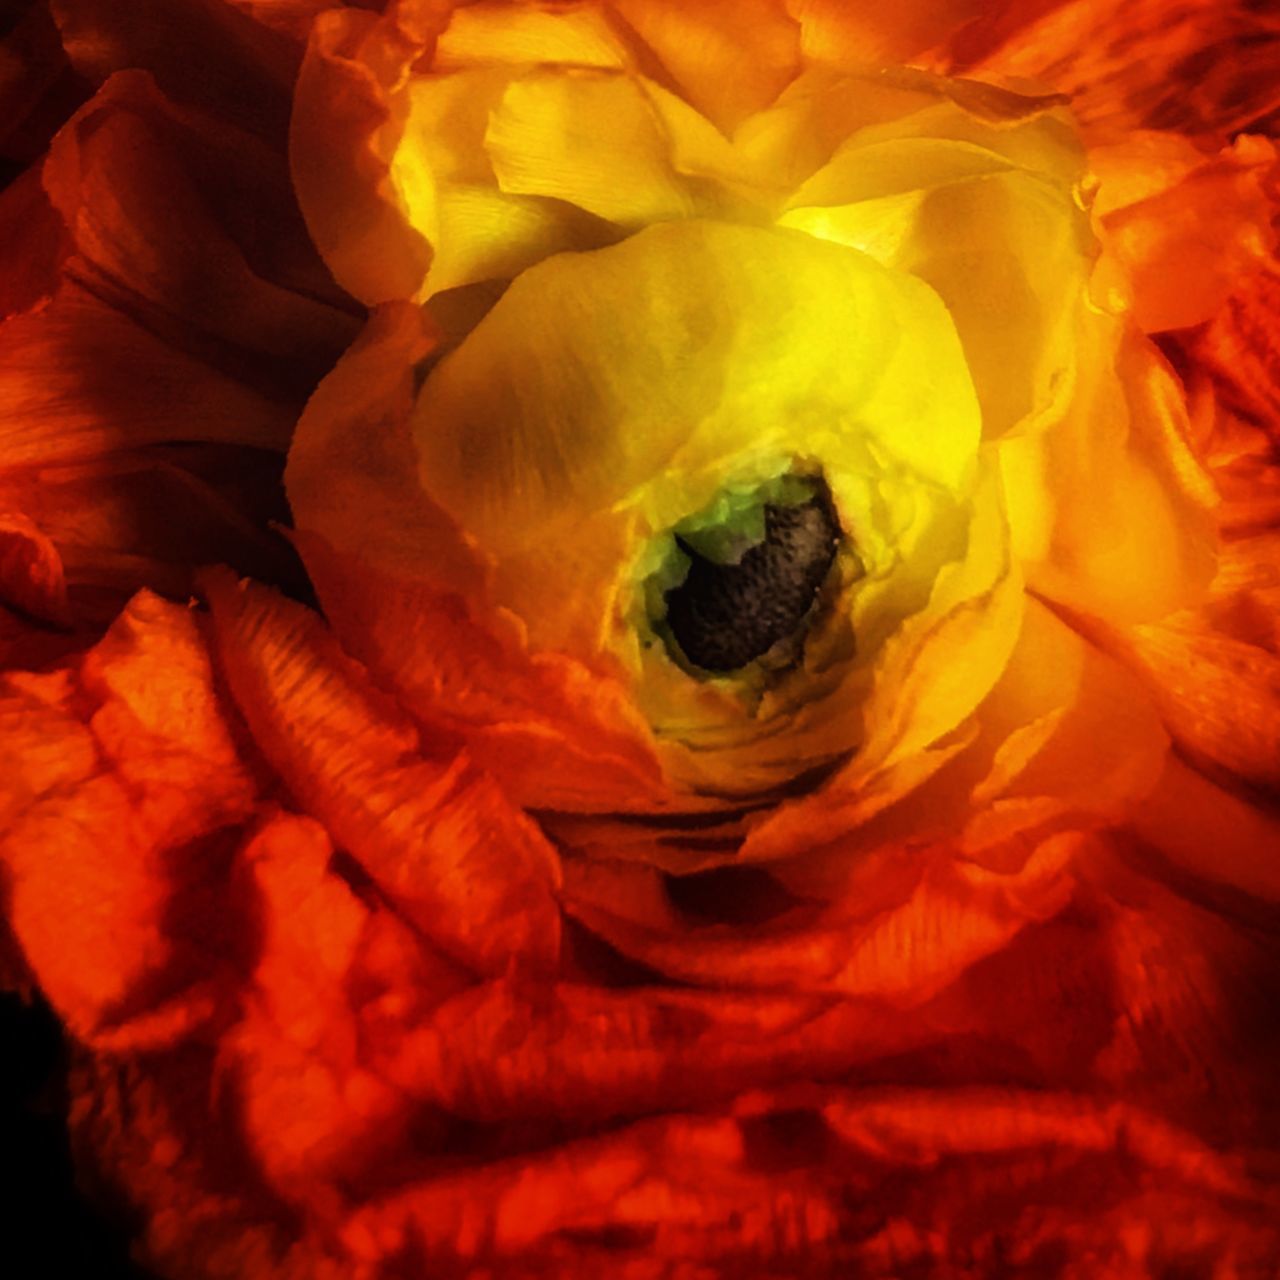 CLOSE-UP OF YELLOW ROSES